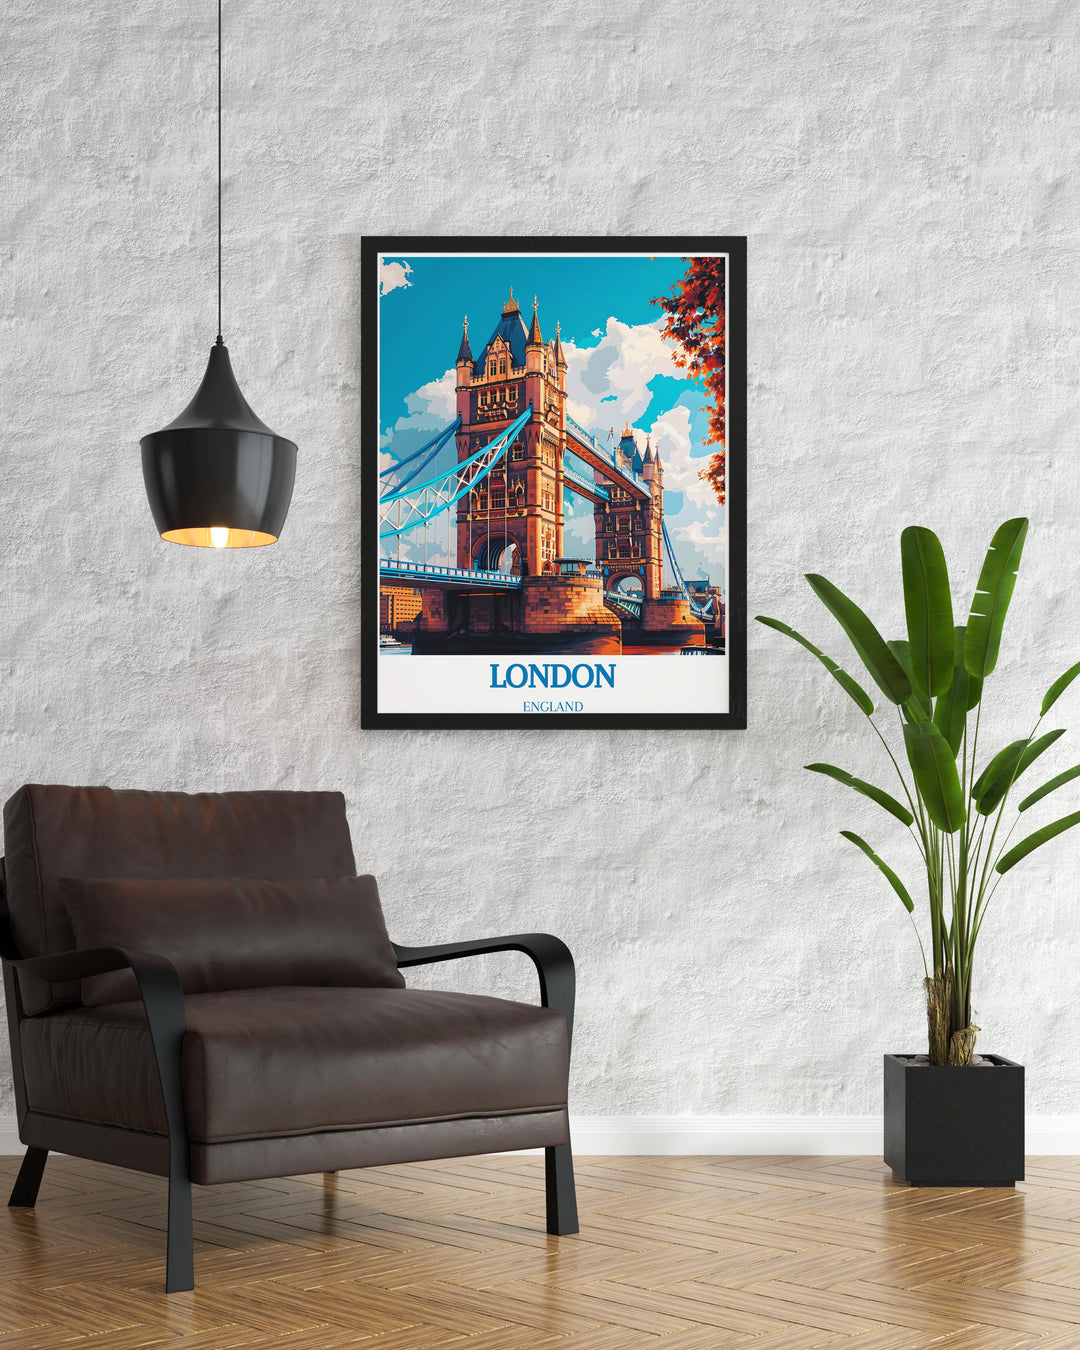 Bespoke print of Tower Bridge, emphasizing its architectural beauty and cultural significance.